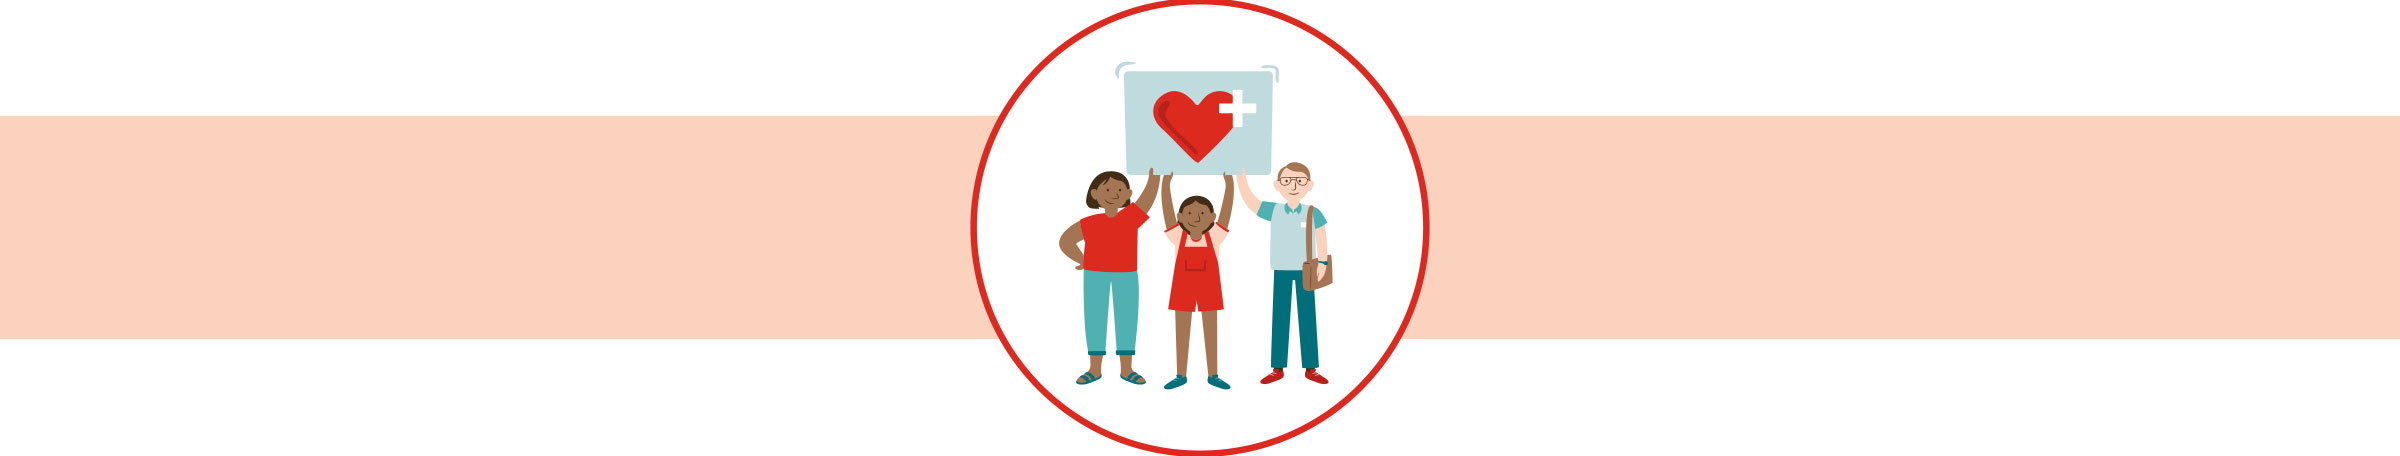 Health promotion icon;  three people holding a sign with a heart and plus symbol